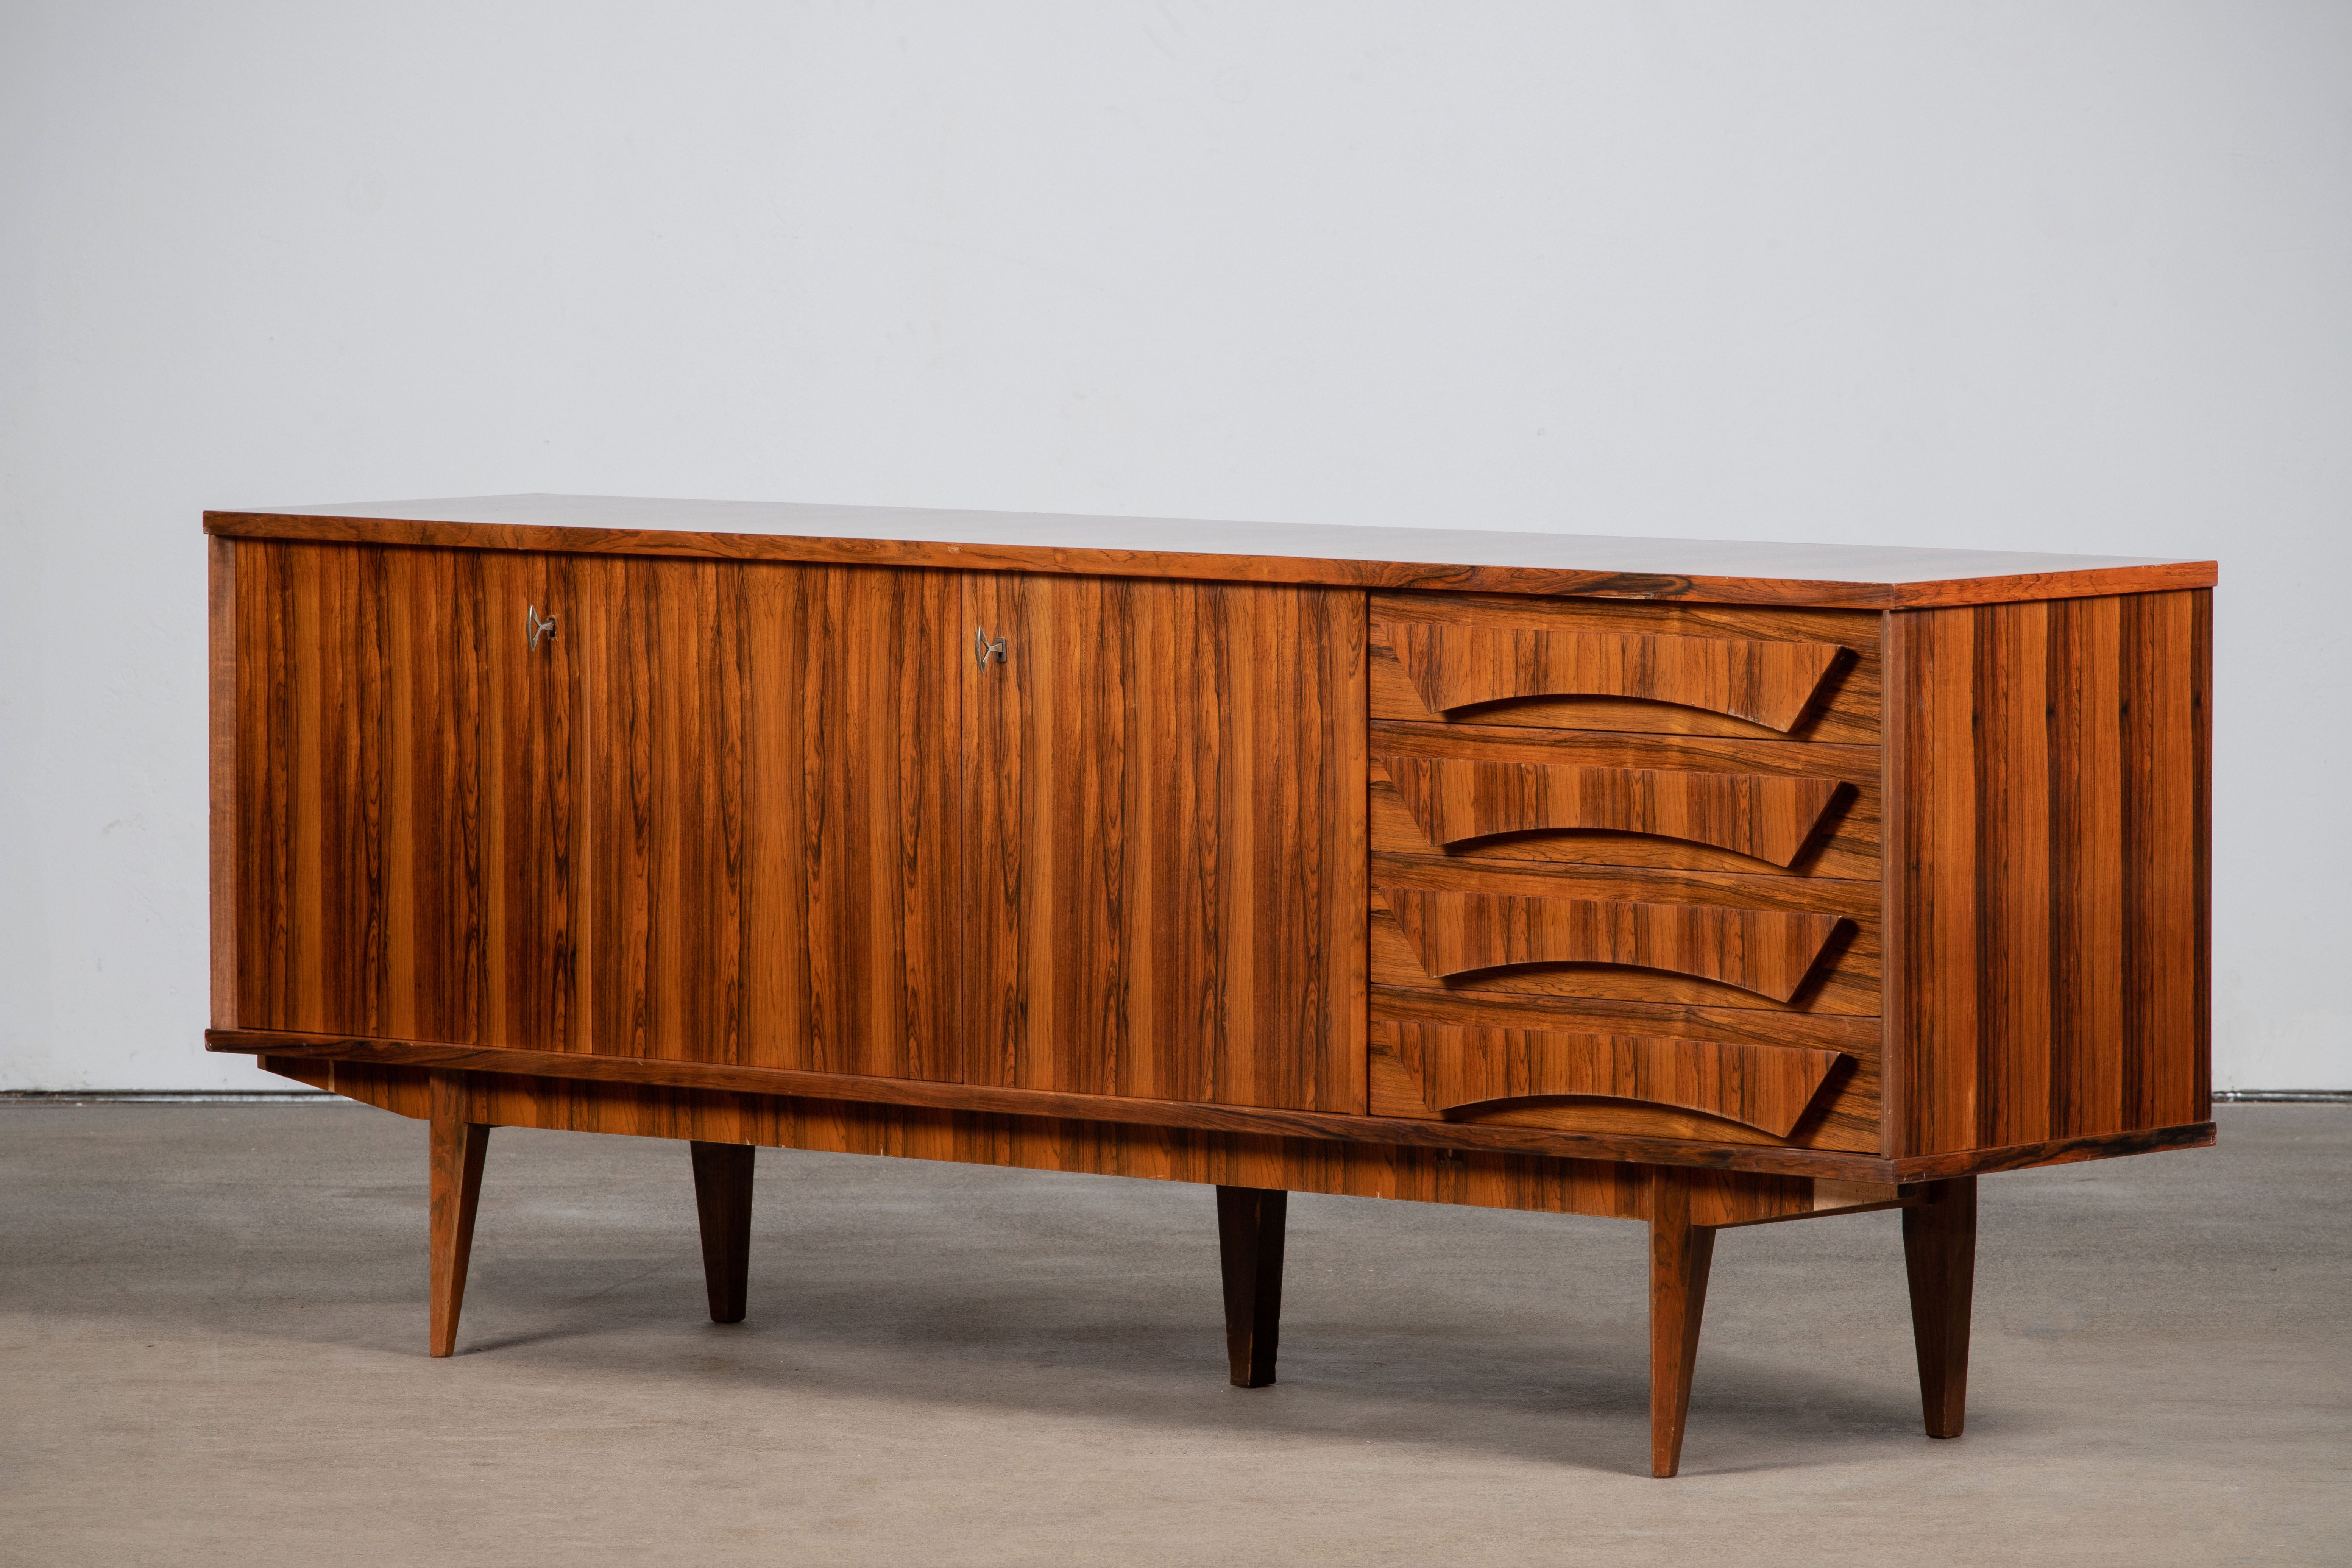 MidCentury Rosewood sideboard.
An elegant piece offering ample storage, the veneer is very ornemental
Good condition with minor wear.